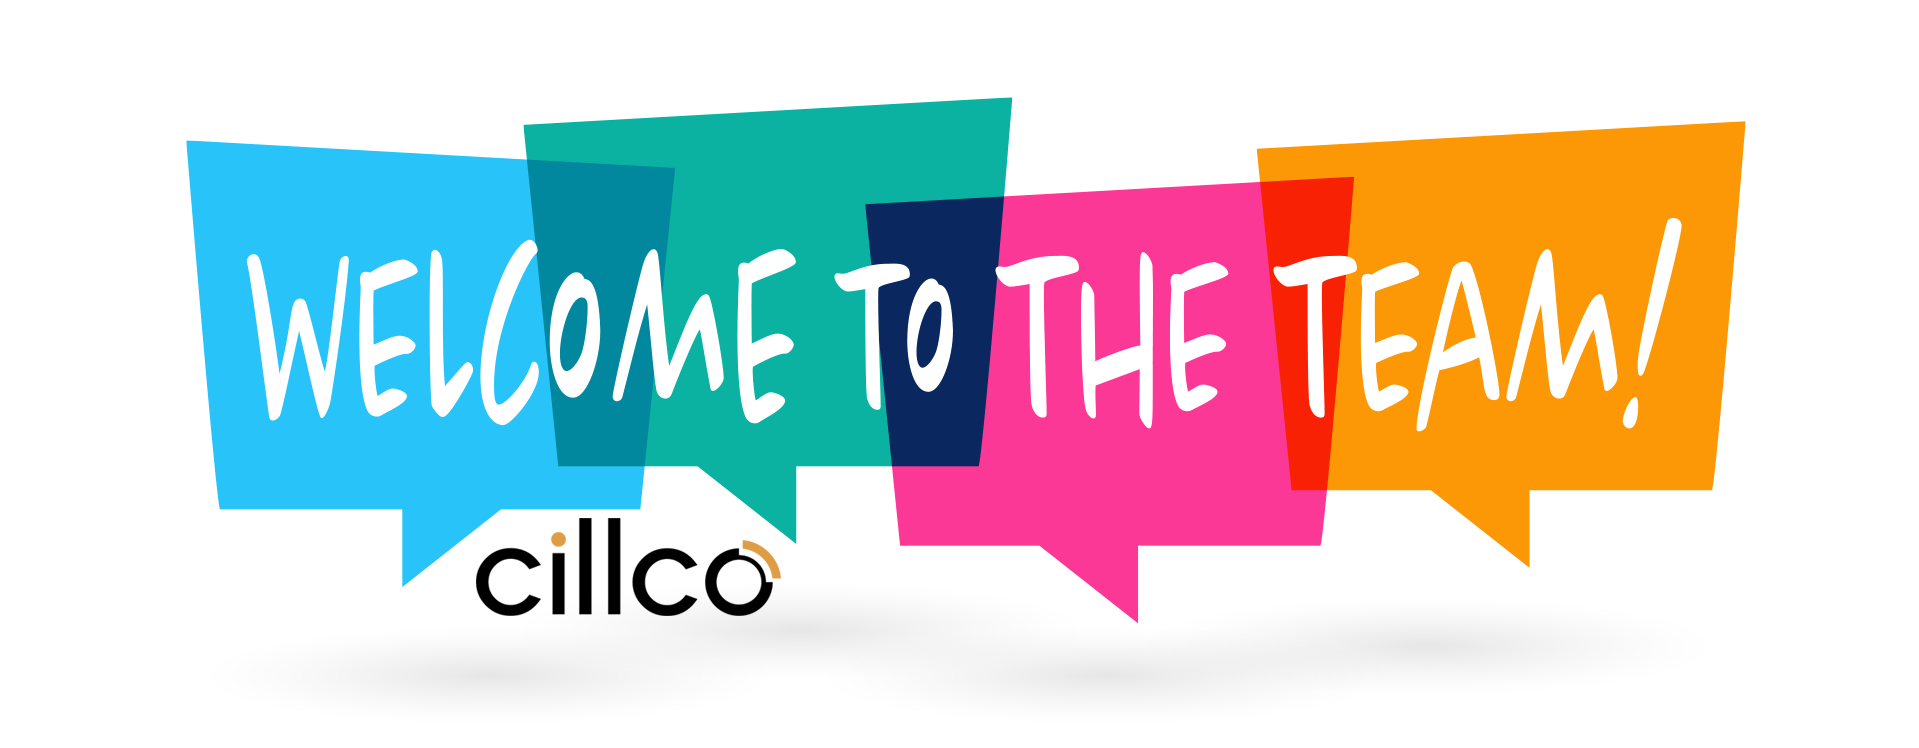 welcome-to-the-team-cillco